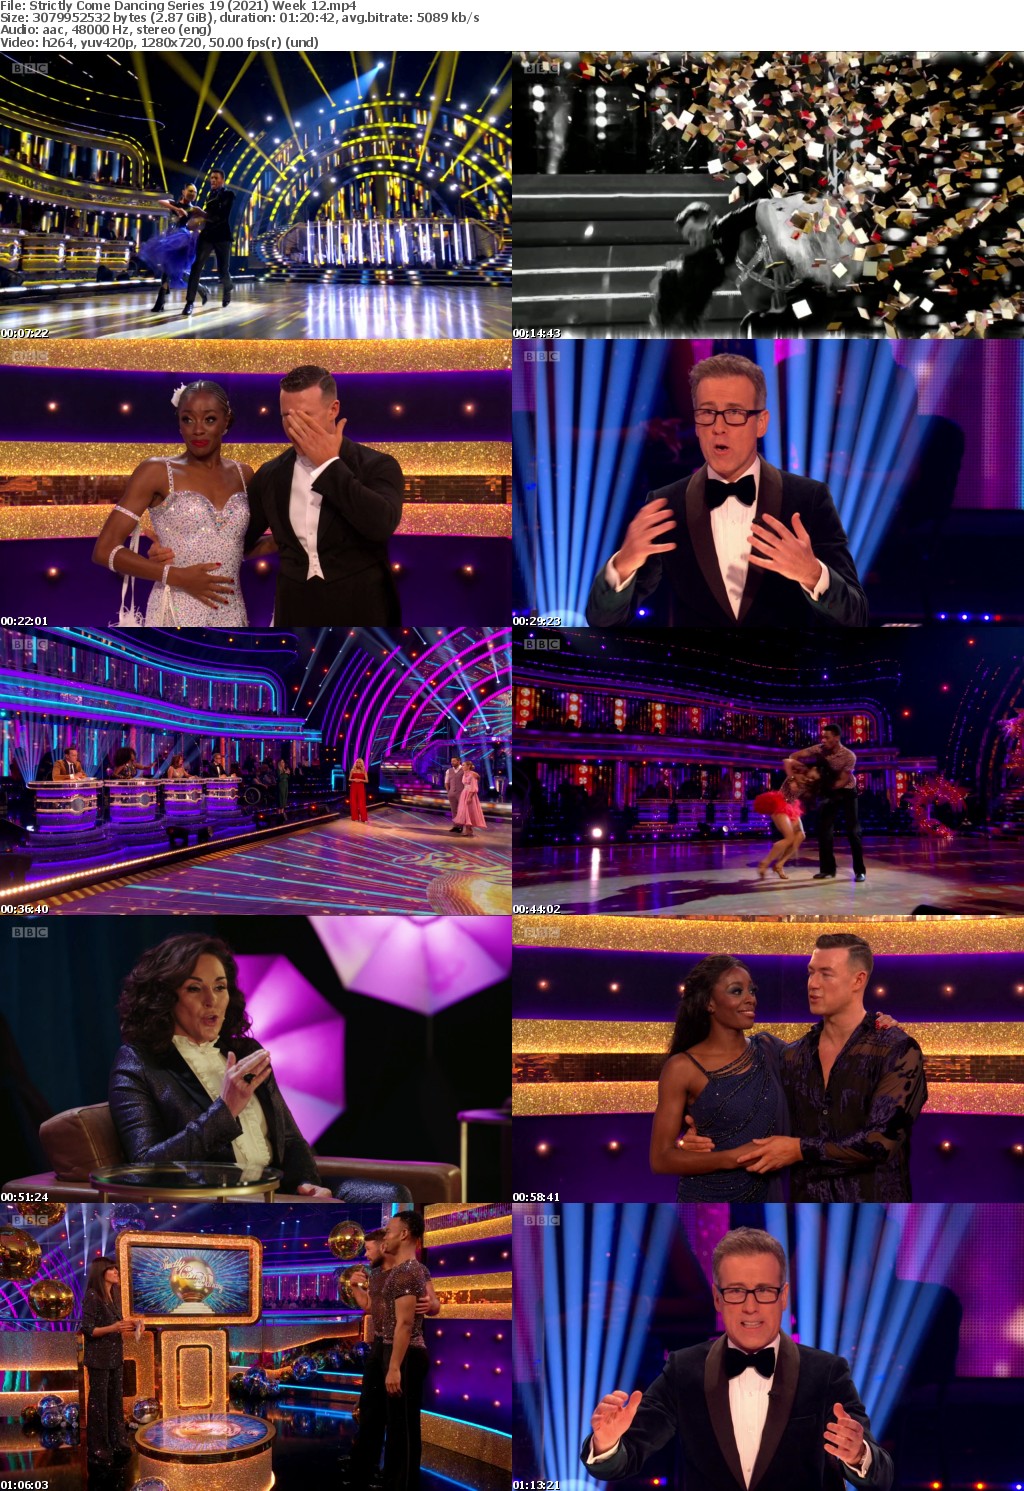 Strictly Come Dancing Series 19 (2021) Week 12 (1280x720p HD, 50fps, soft Eng subs)